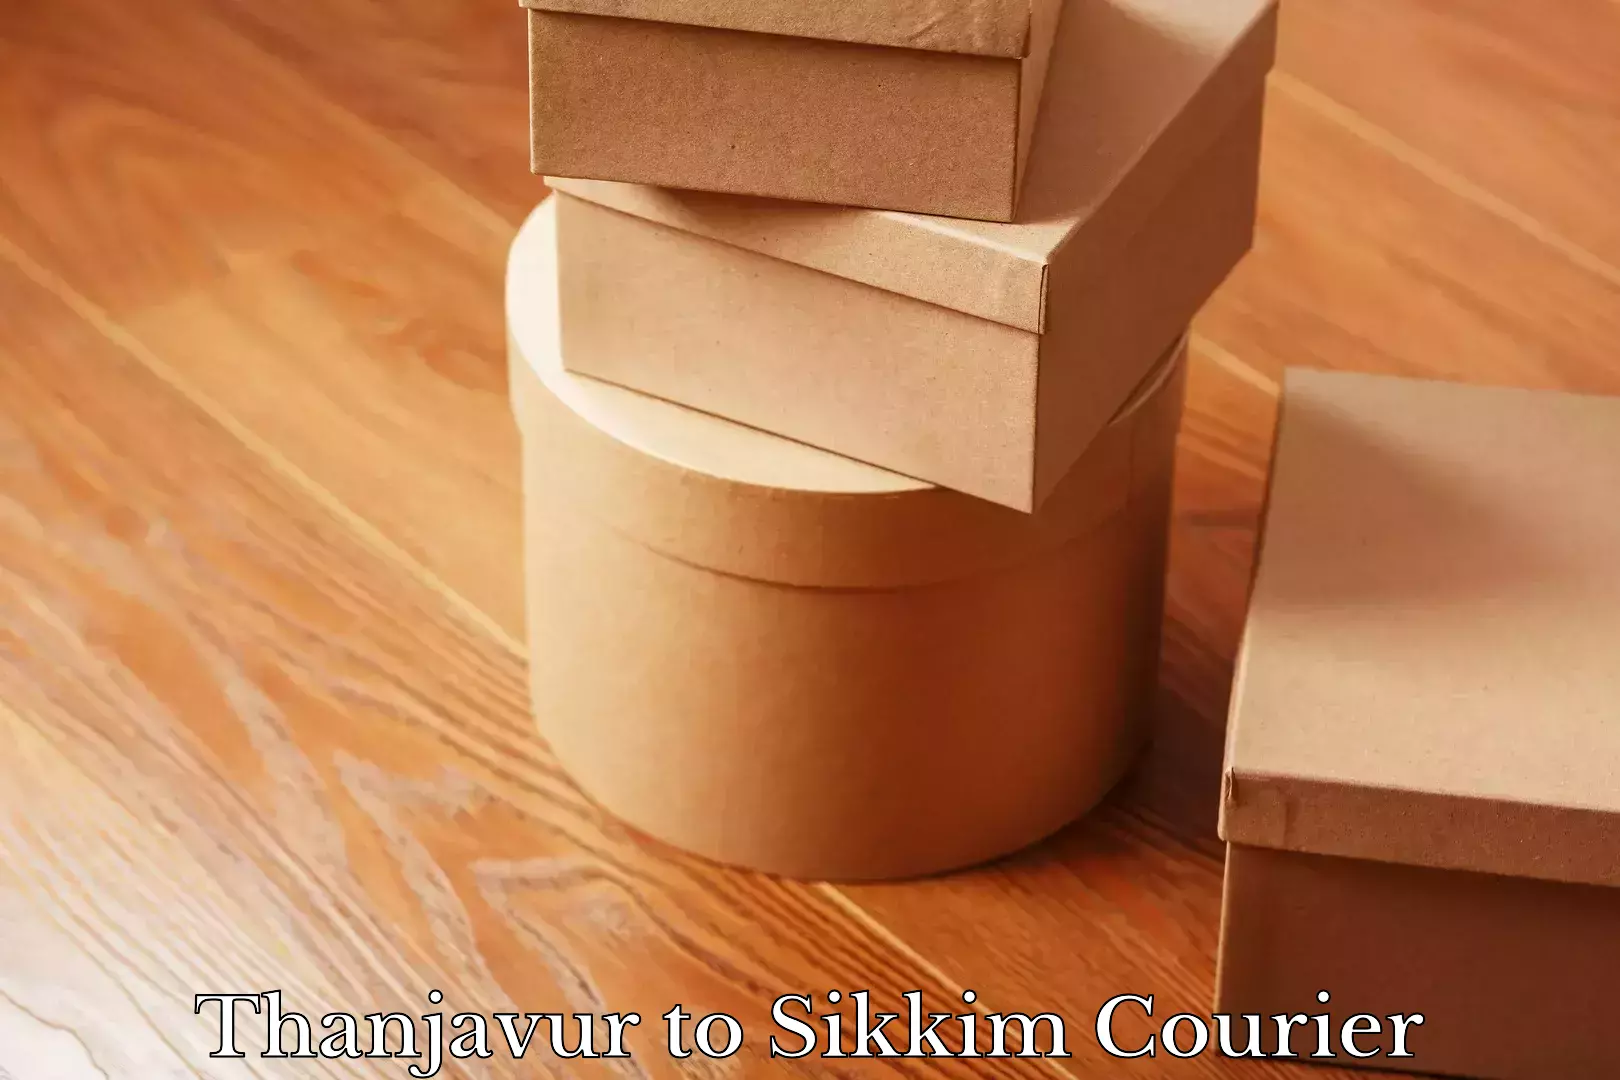 Courier service partnerships Thanjavur to Sikkim